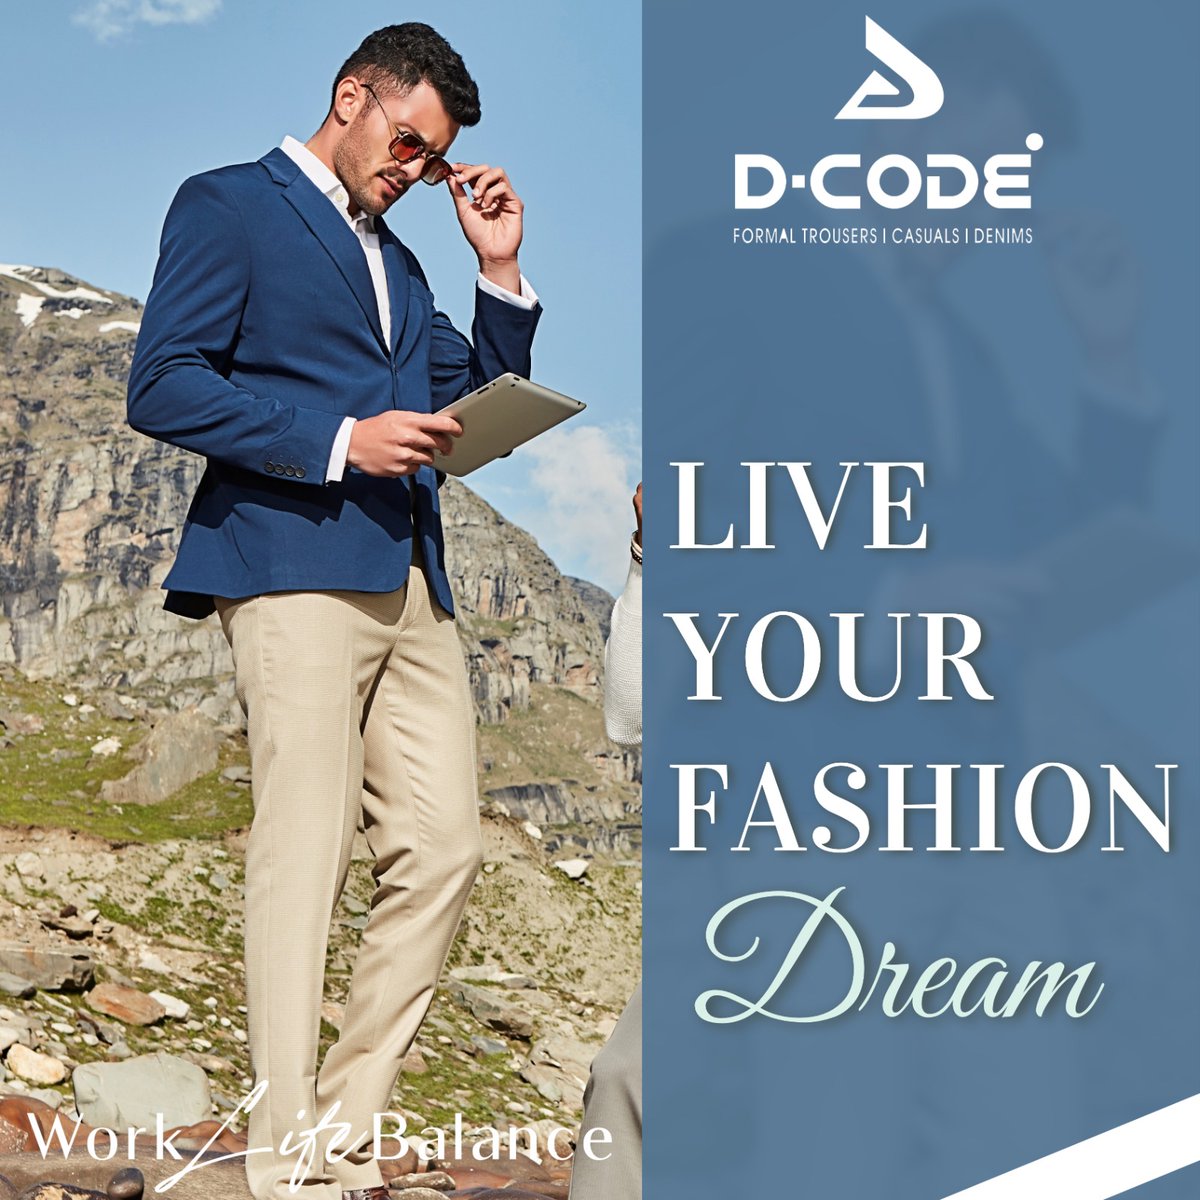 In the pursuit of excellence, well-fitted trousers are non-negotiable. 👔 #MensFashion #DapperGent #CasualElegance #Menswear #FashionForward #ClassicLook #SharpDressedMan #MensStyle #StylishShirts #TimelessFashion #MensWardrobe #dcode